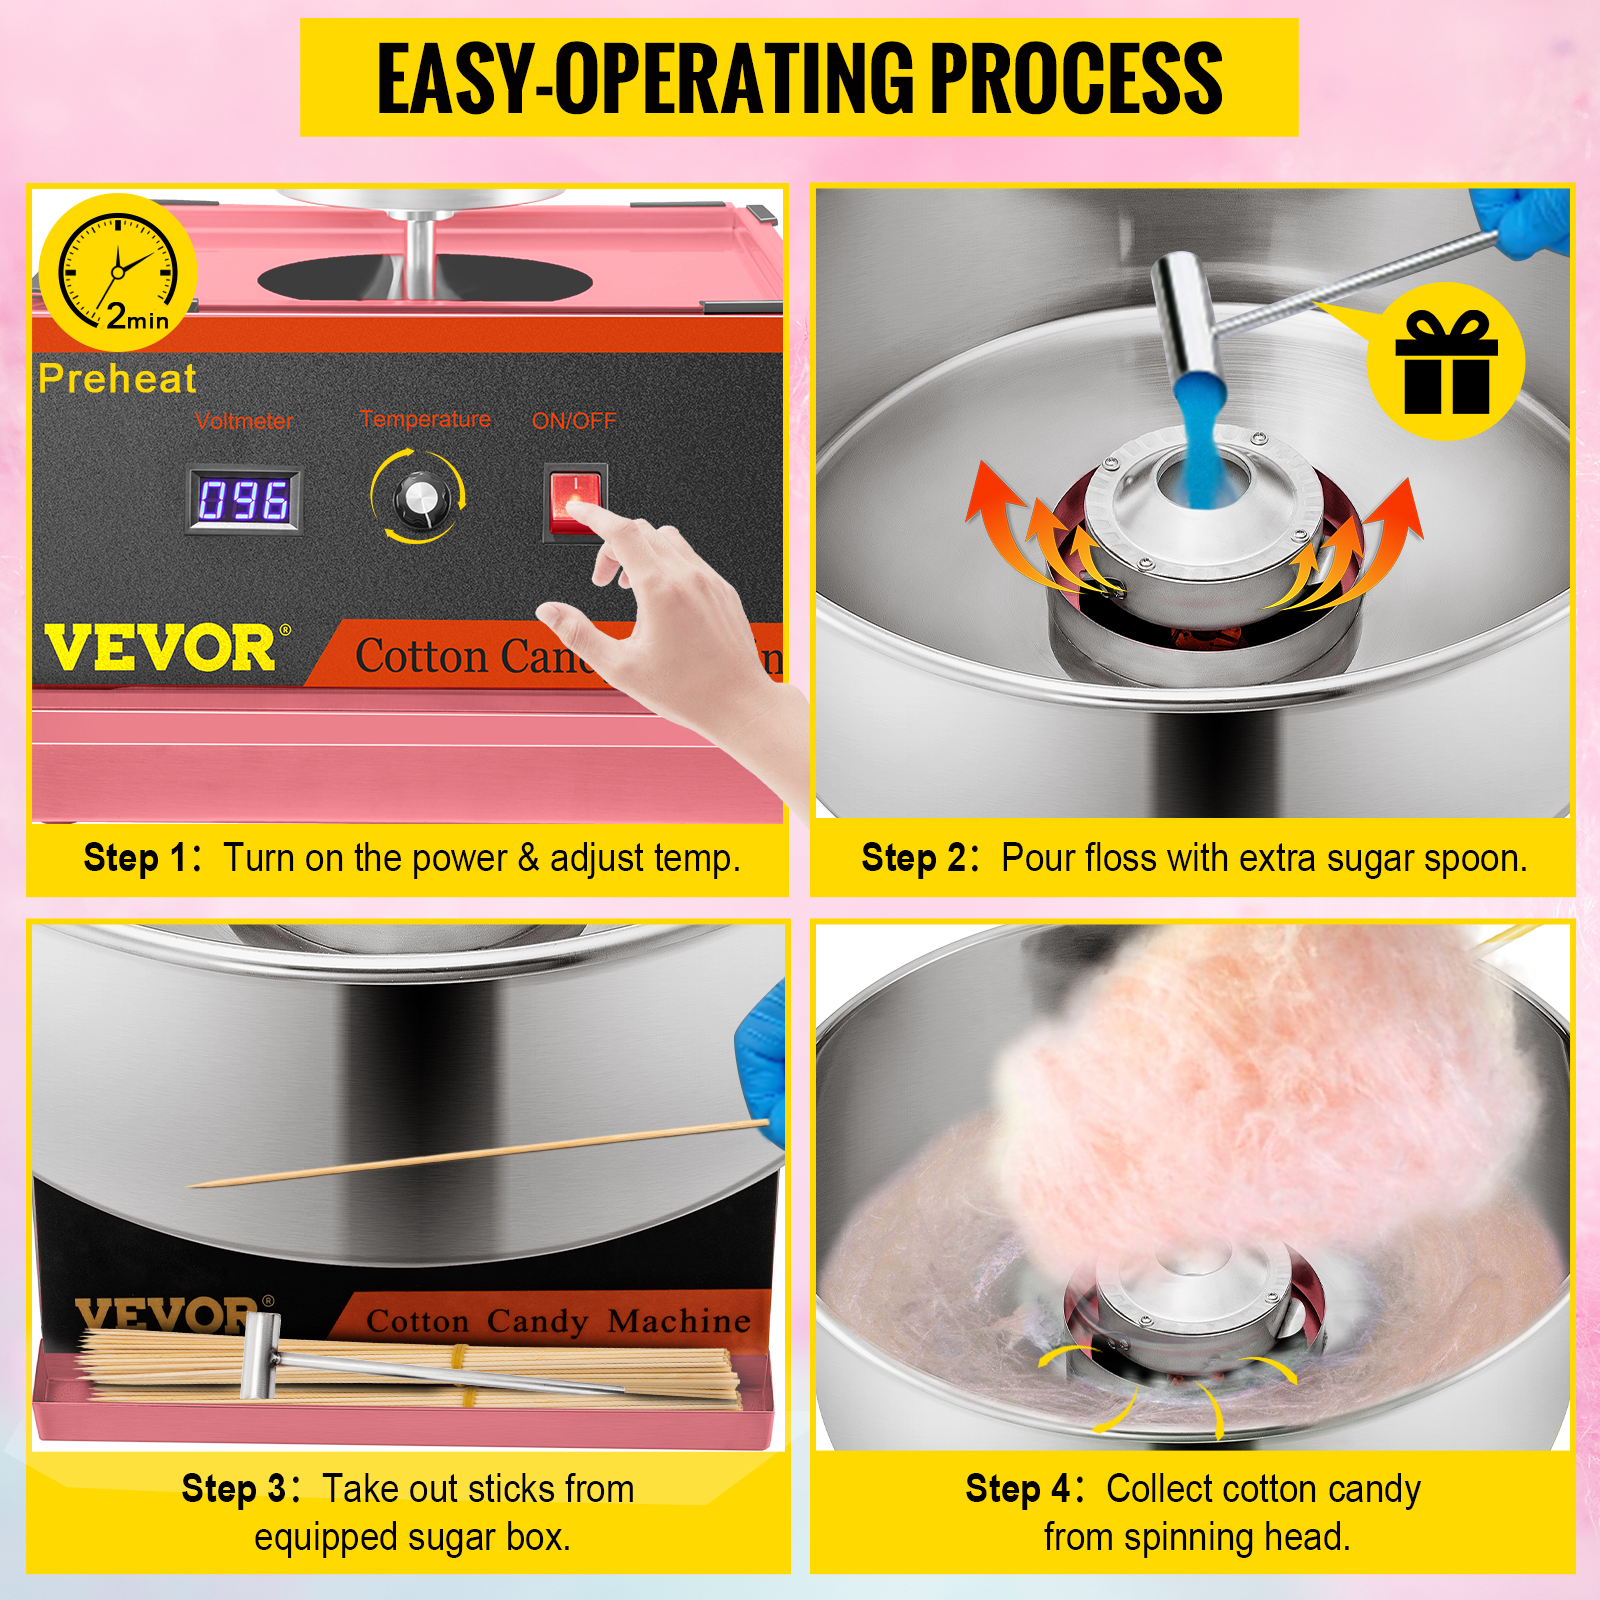 VEVOR Electric Cotton Candy Machine, 19.7-inch Cotton Candy Maker, 1050W Candy Floss Maker, Pink Commercial Cotton Candy Machine with Stainless Steel Bowl and Sugar Scoop, Perfect for Family Party